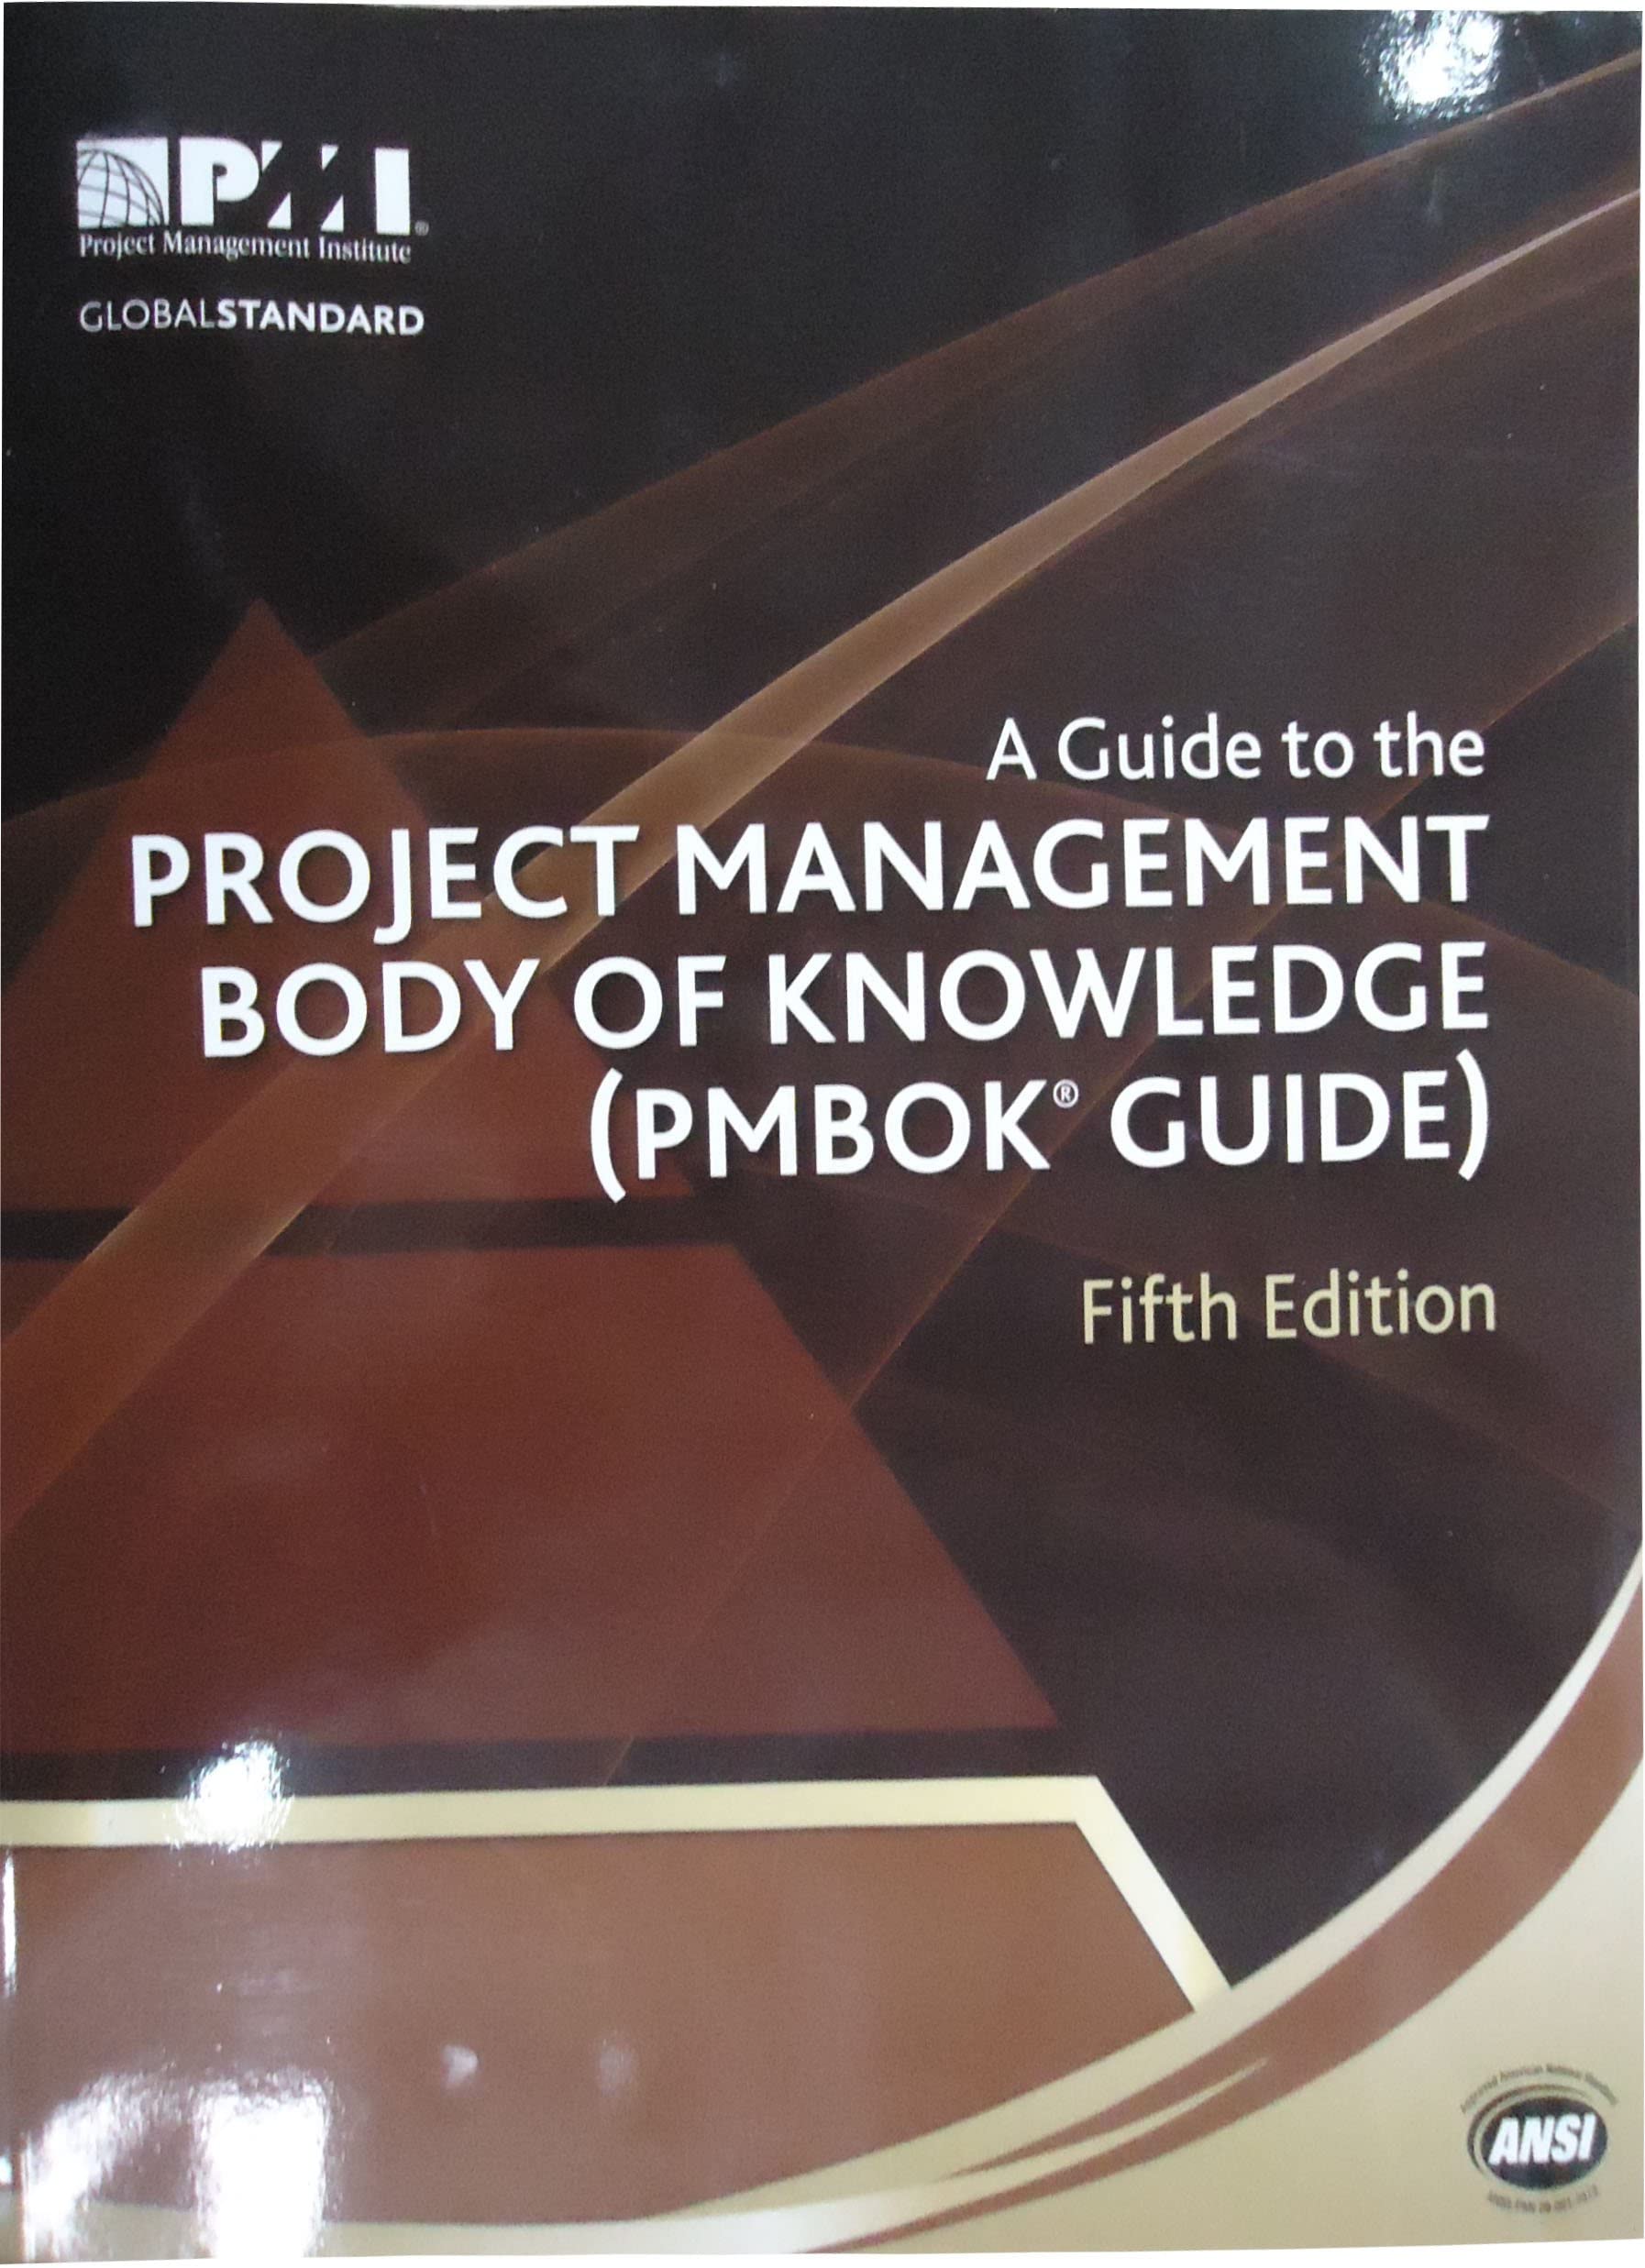 A Guide to the Project Management Body of Knowledge (PMBOK® Guide)Fifth Edition - Project Management Institute - image 2 of 2